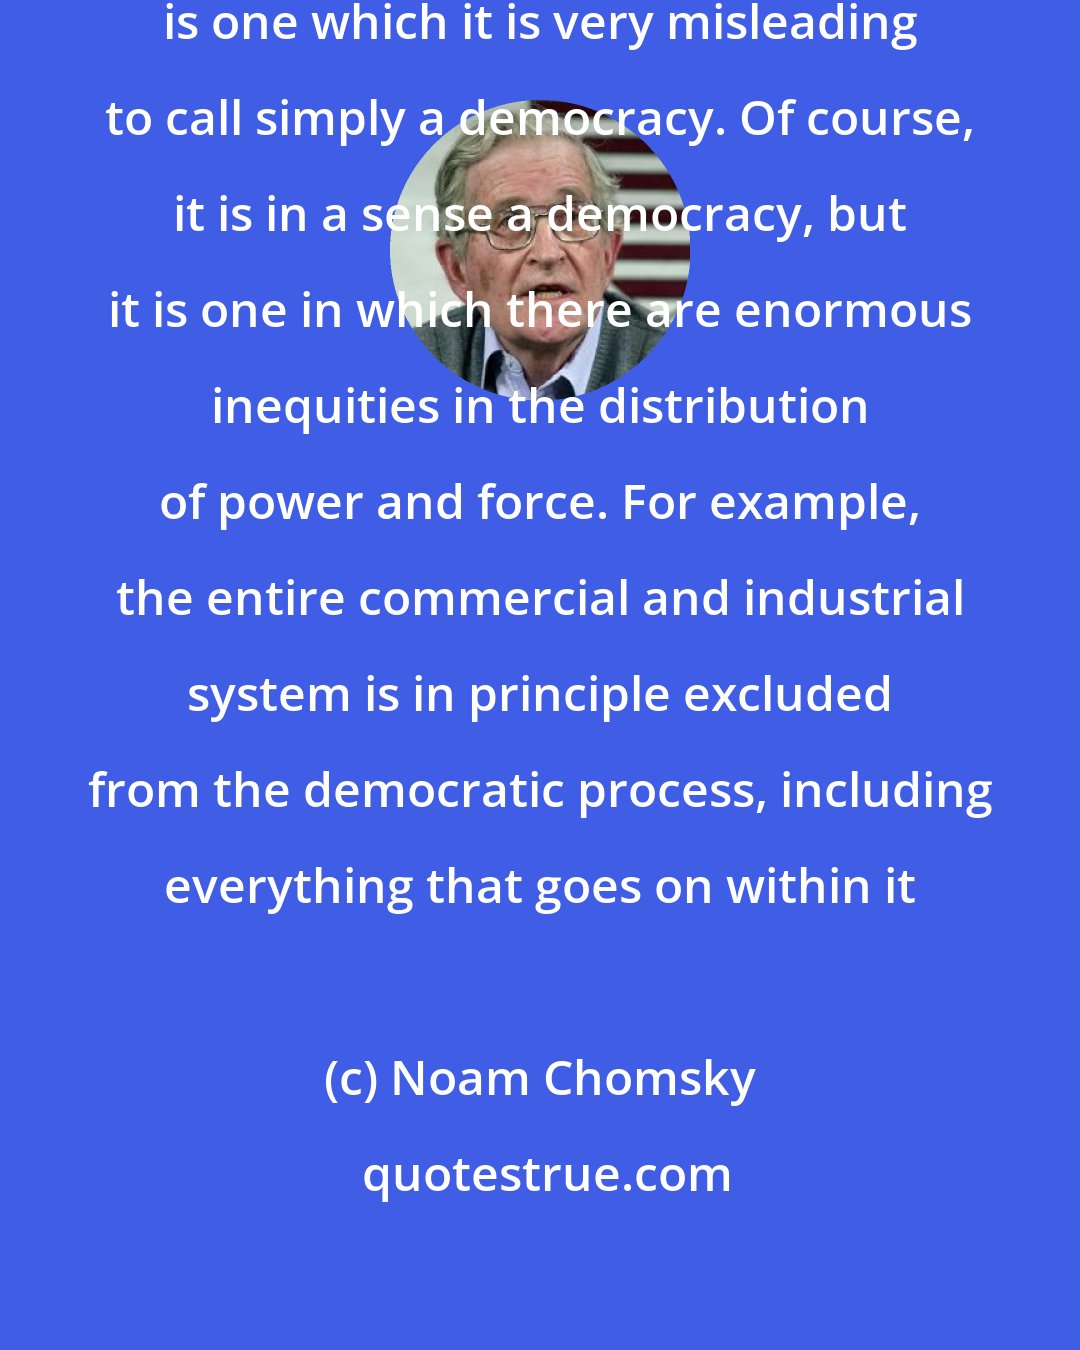 Noam Chomsky: The real world of American society is one which it is very misleading to call simply a democracy. Of course, it is in a sense a democracy, but it is one in which there are enormous inequities in the distribution of power and force. For example, the entire commercial and industrial system is in principle excluded from the democratic process, including everything that goes on within it